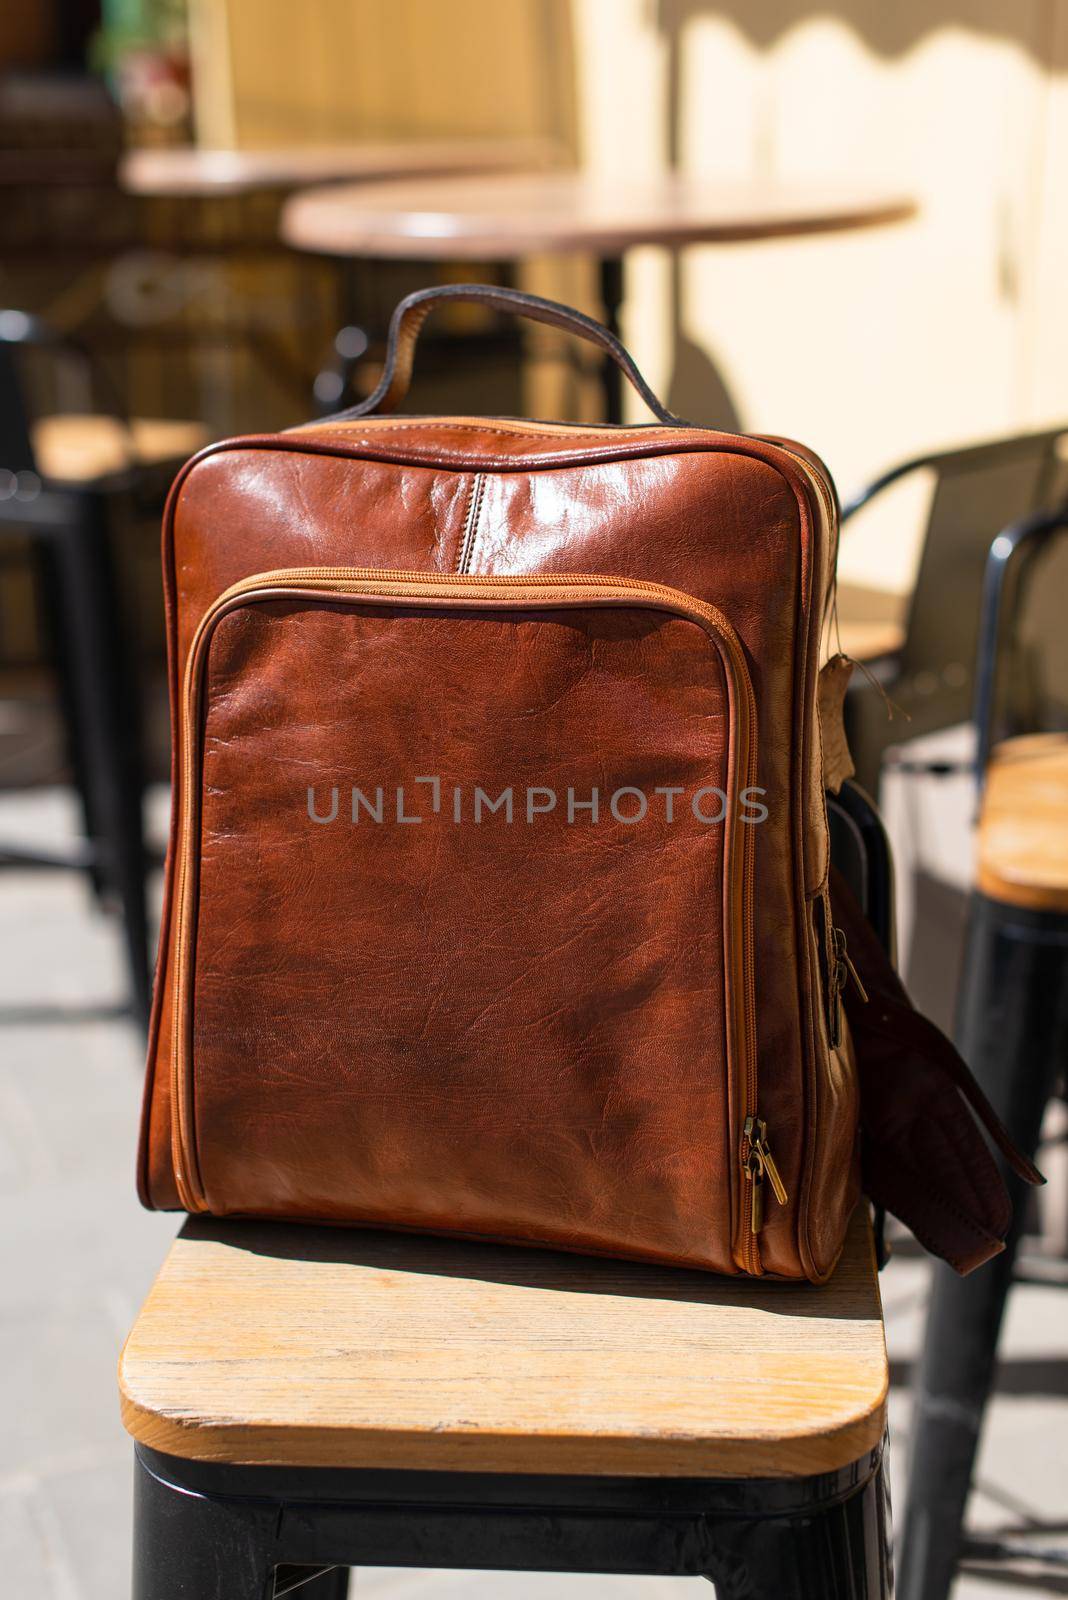 Orange leather backpack. Street photo. Natural light by Ashtray25